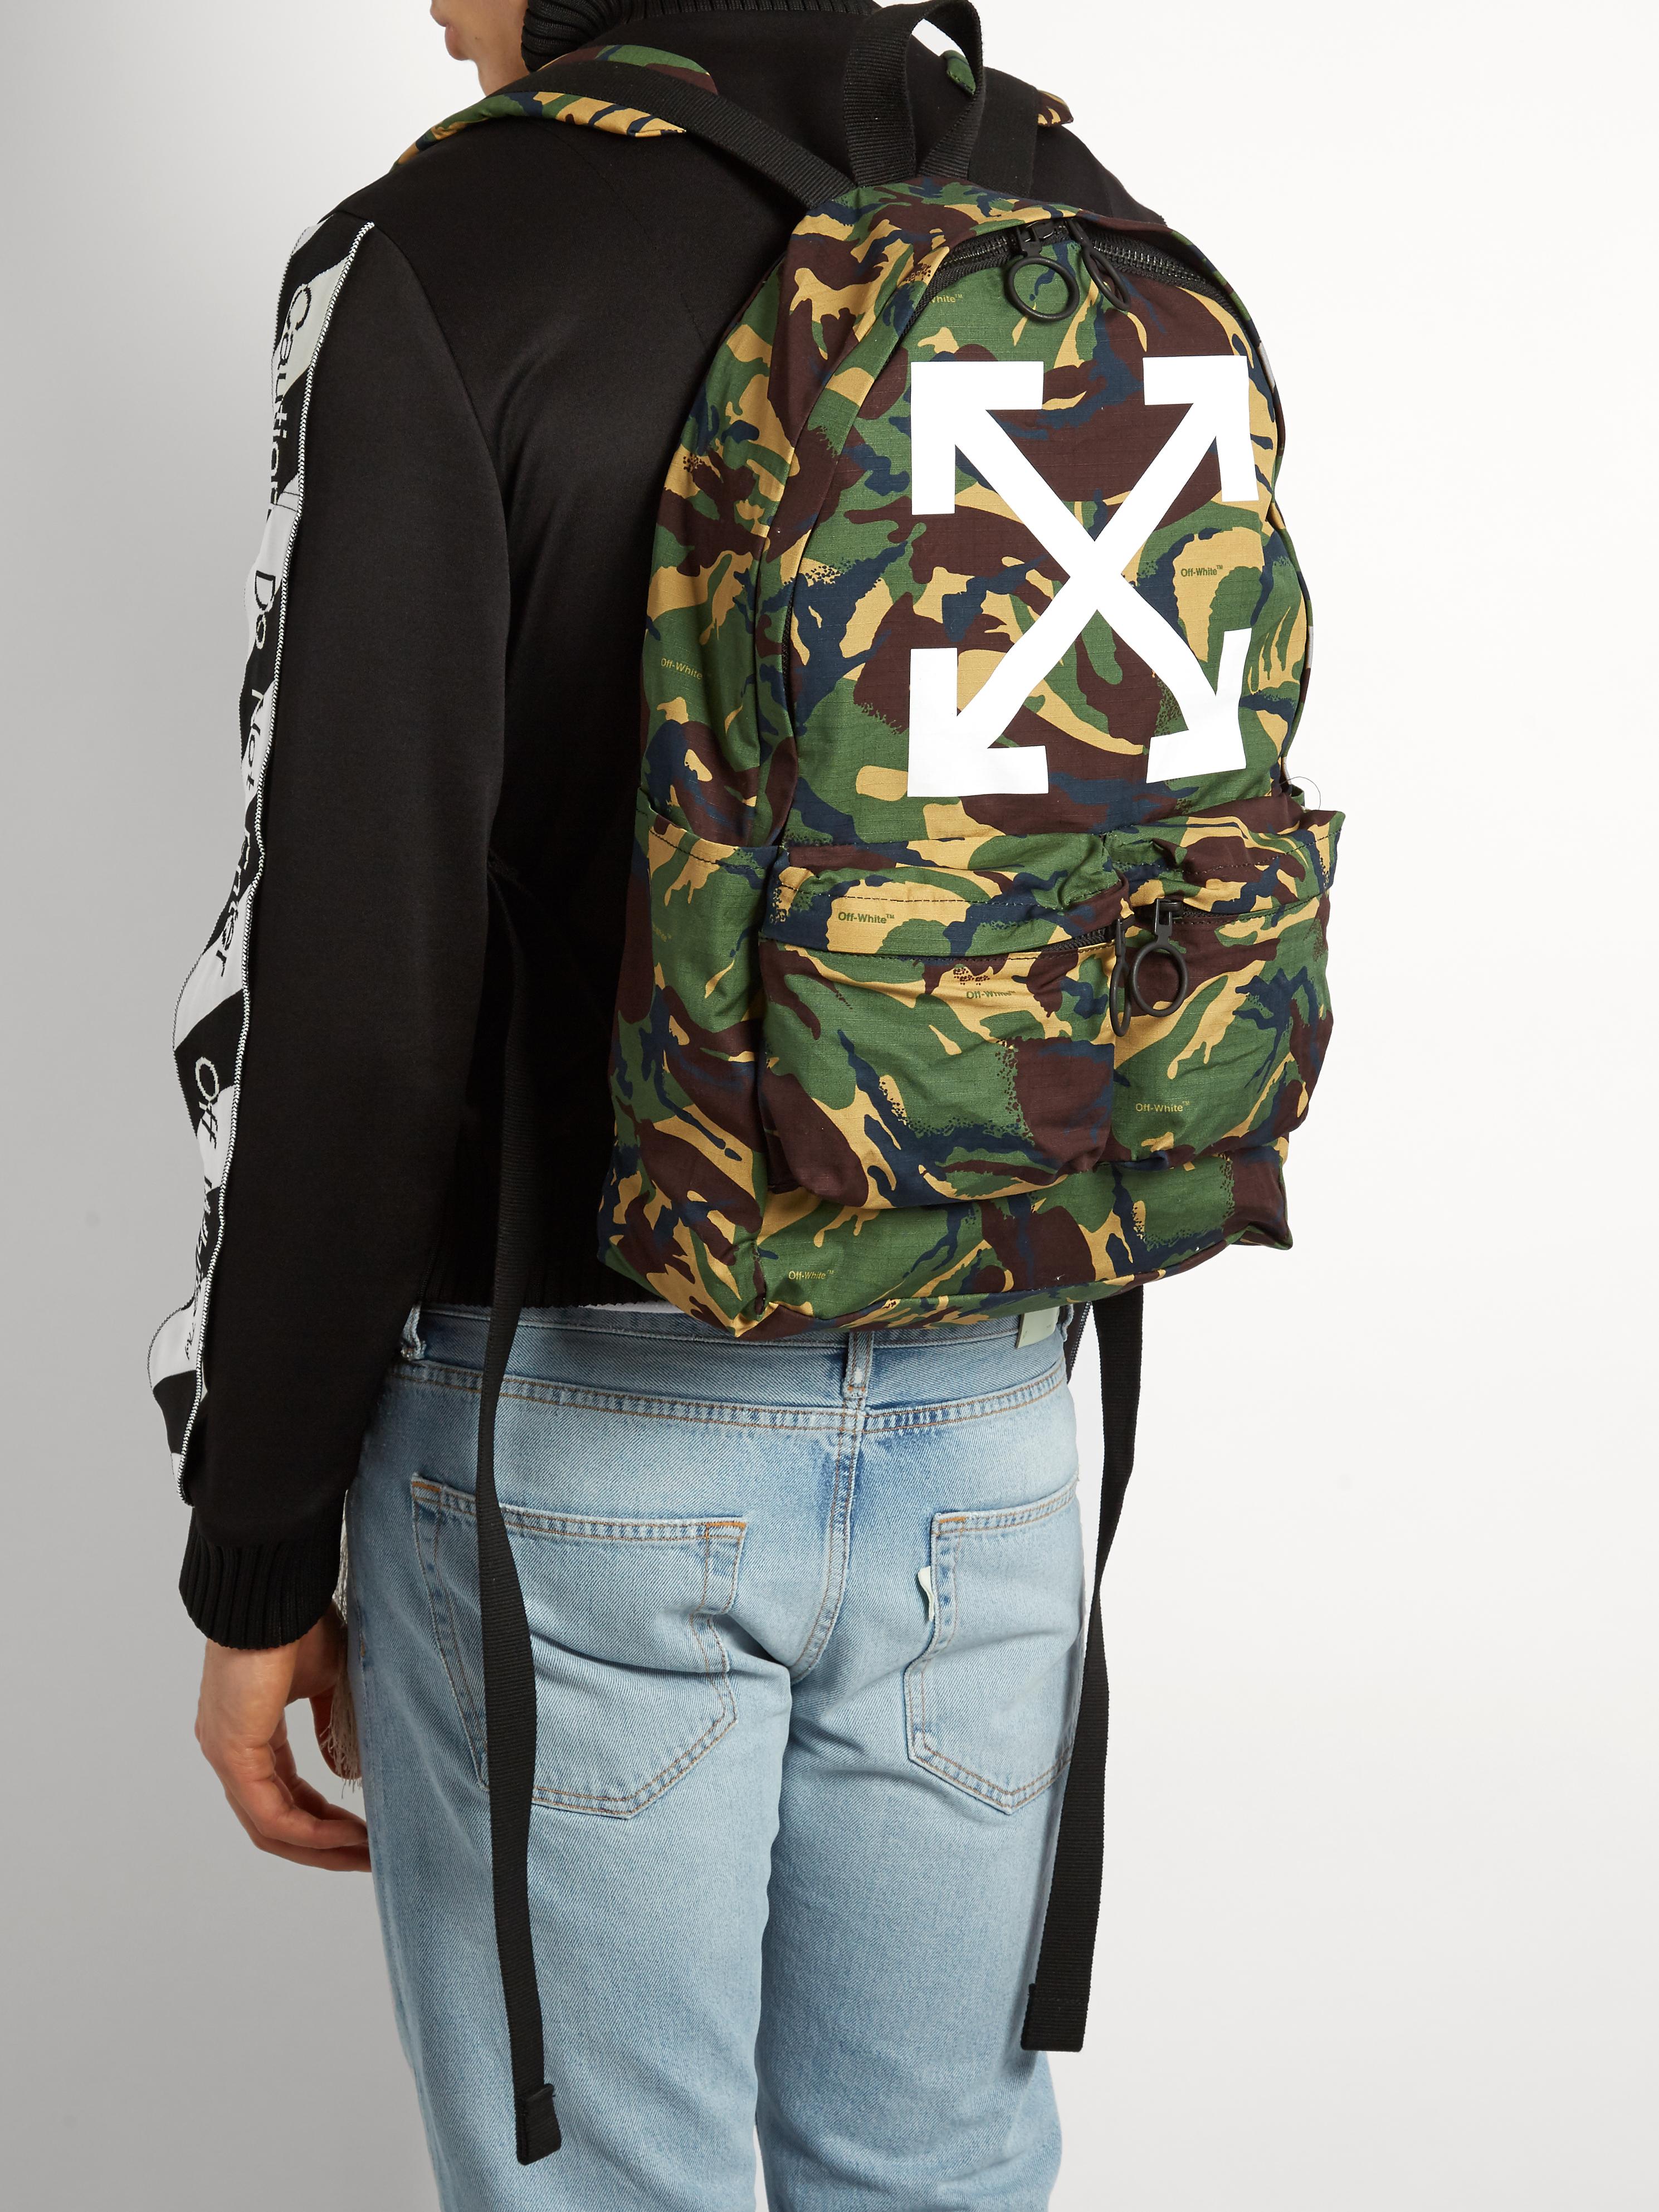 Off-White c/o Virgil Abloh Arrows Cotton Backpack in Green for Men - Lyst